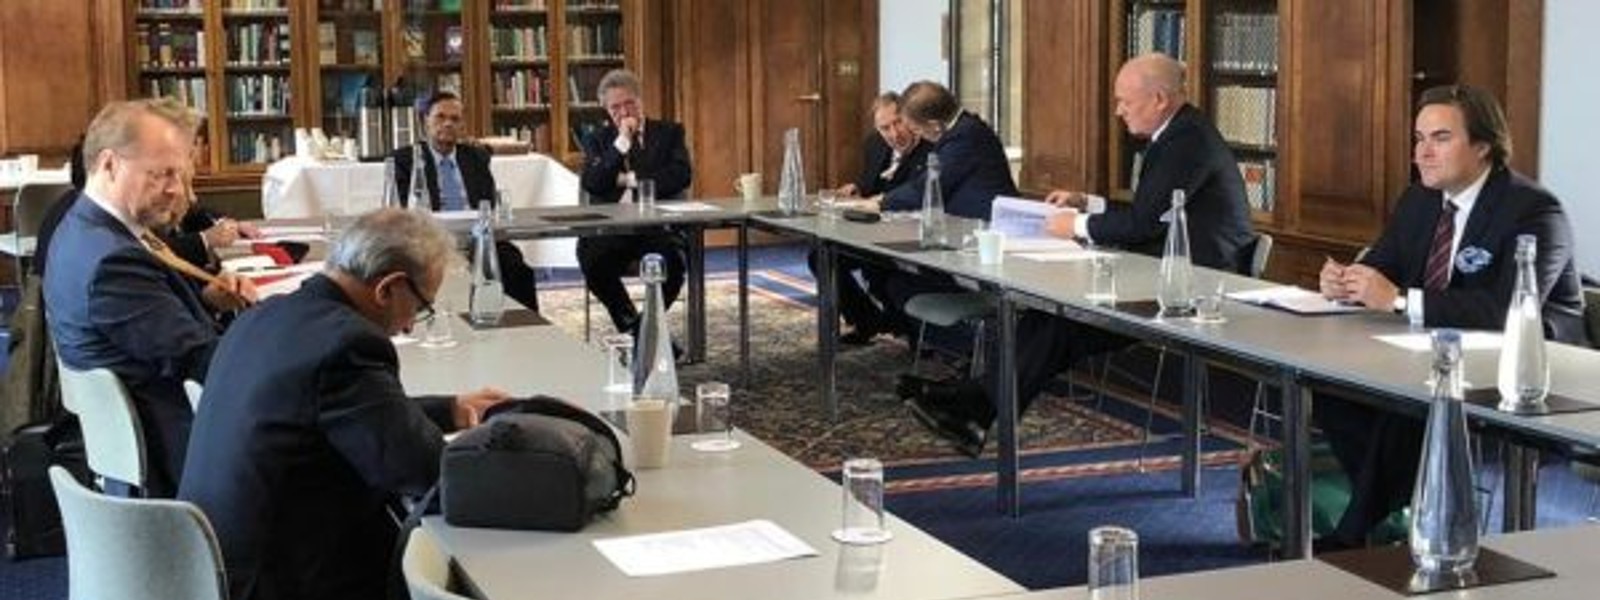 Foreign Minister visits Cambridge University for discussion